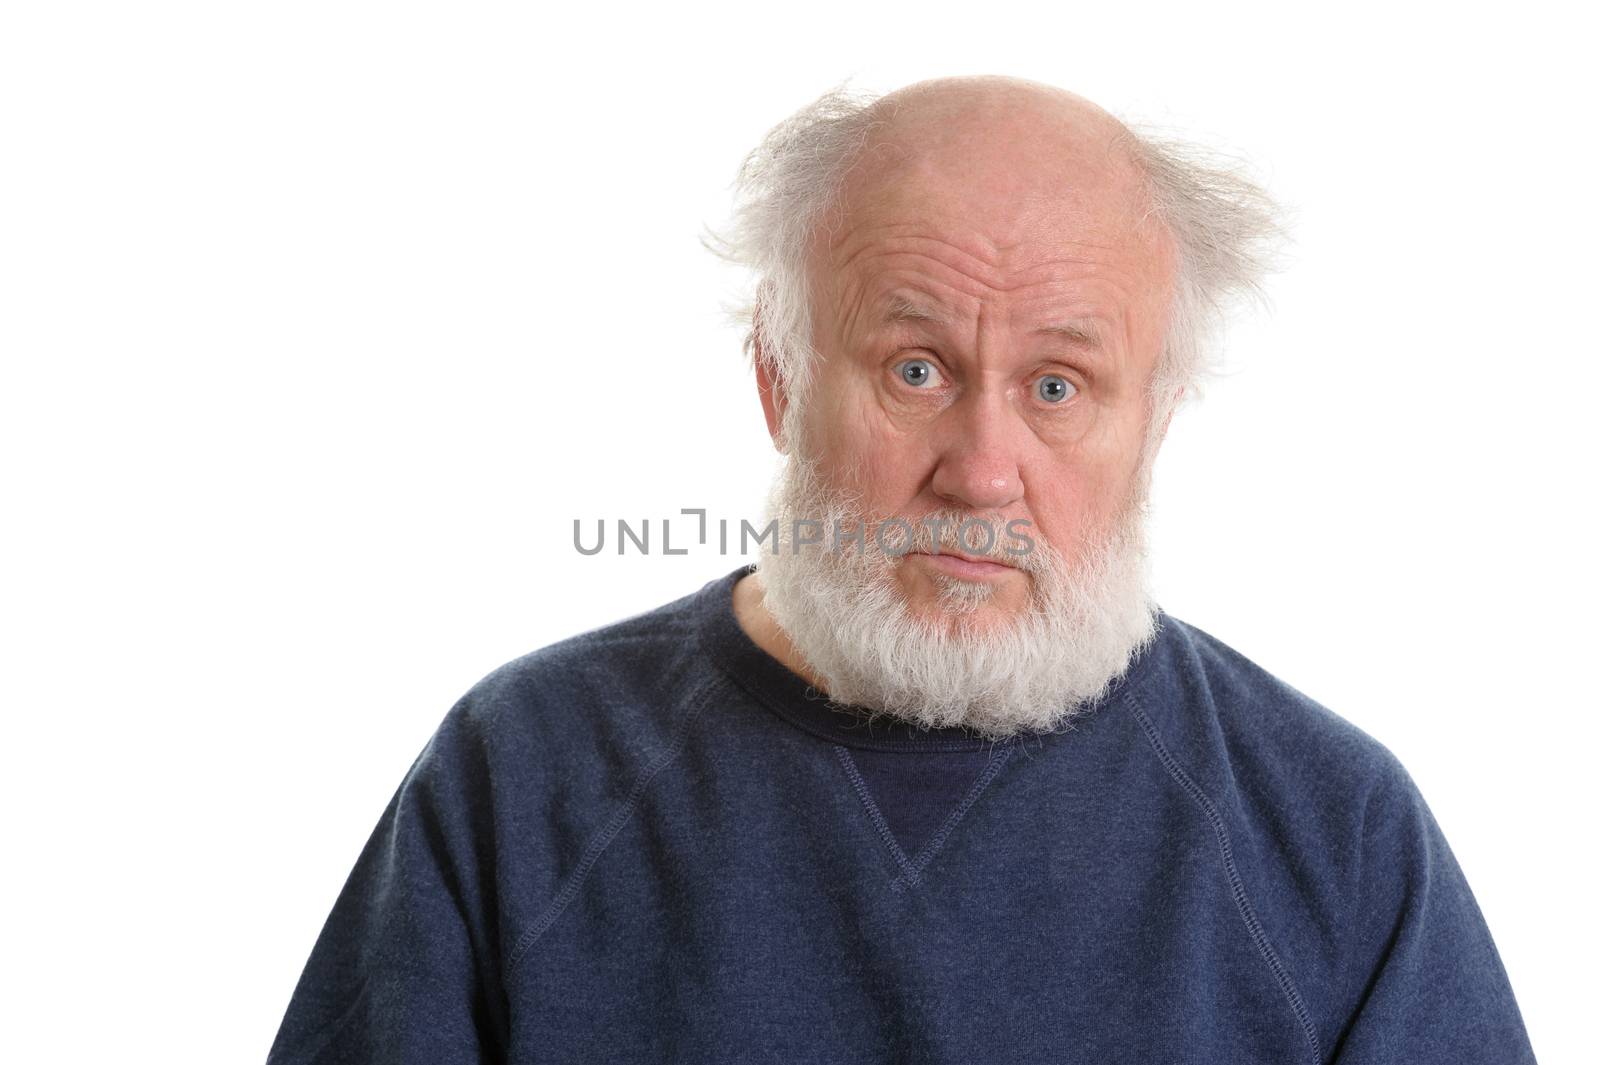 calm and sad depressing old bald man isolated portrait isolated on white